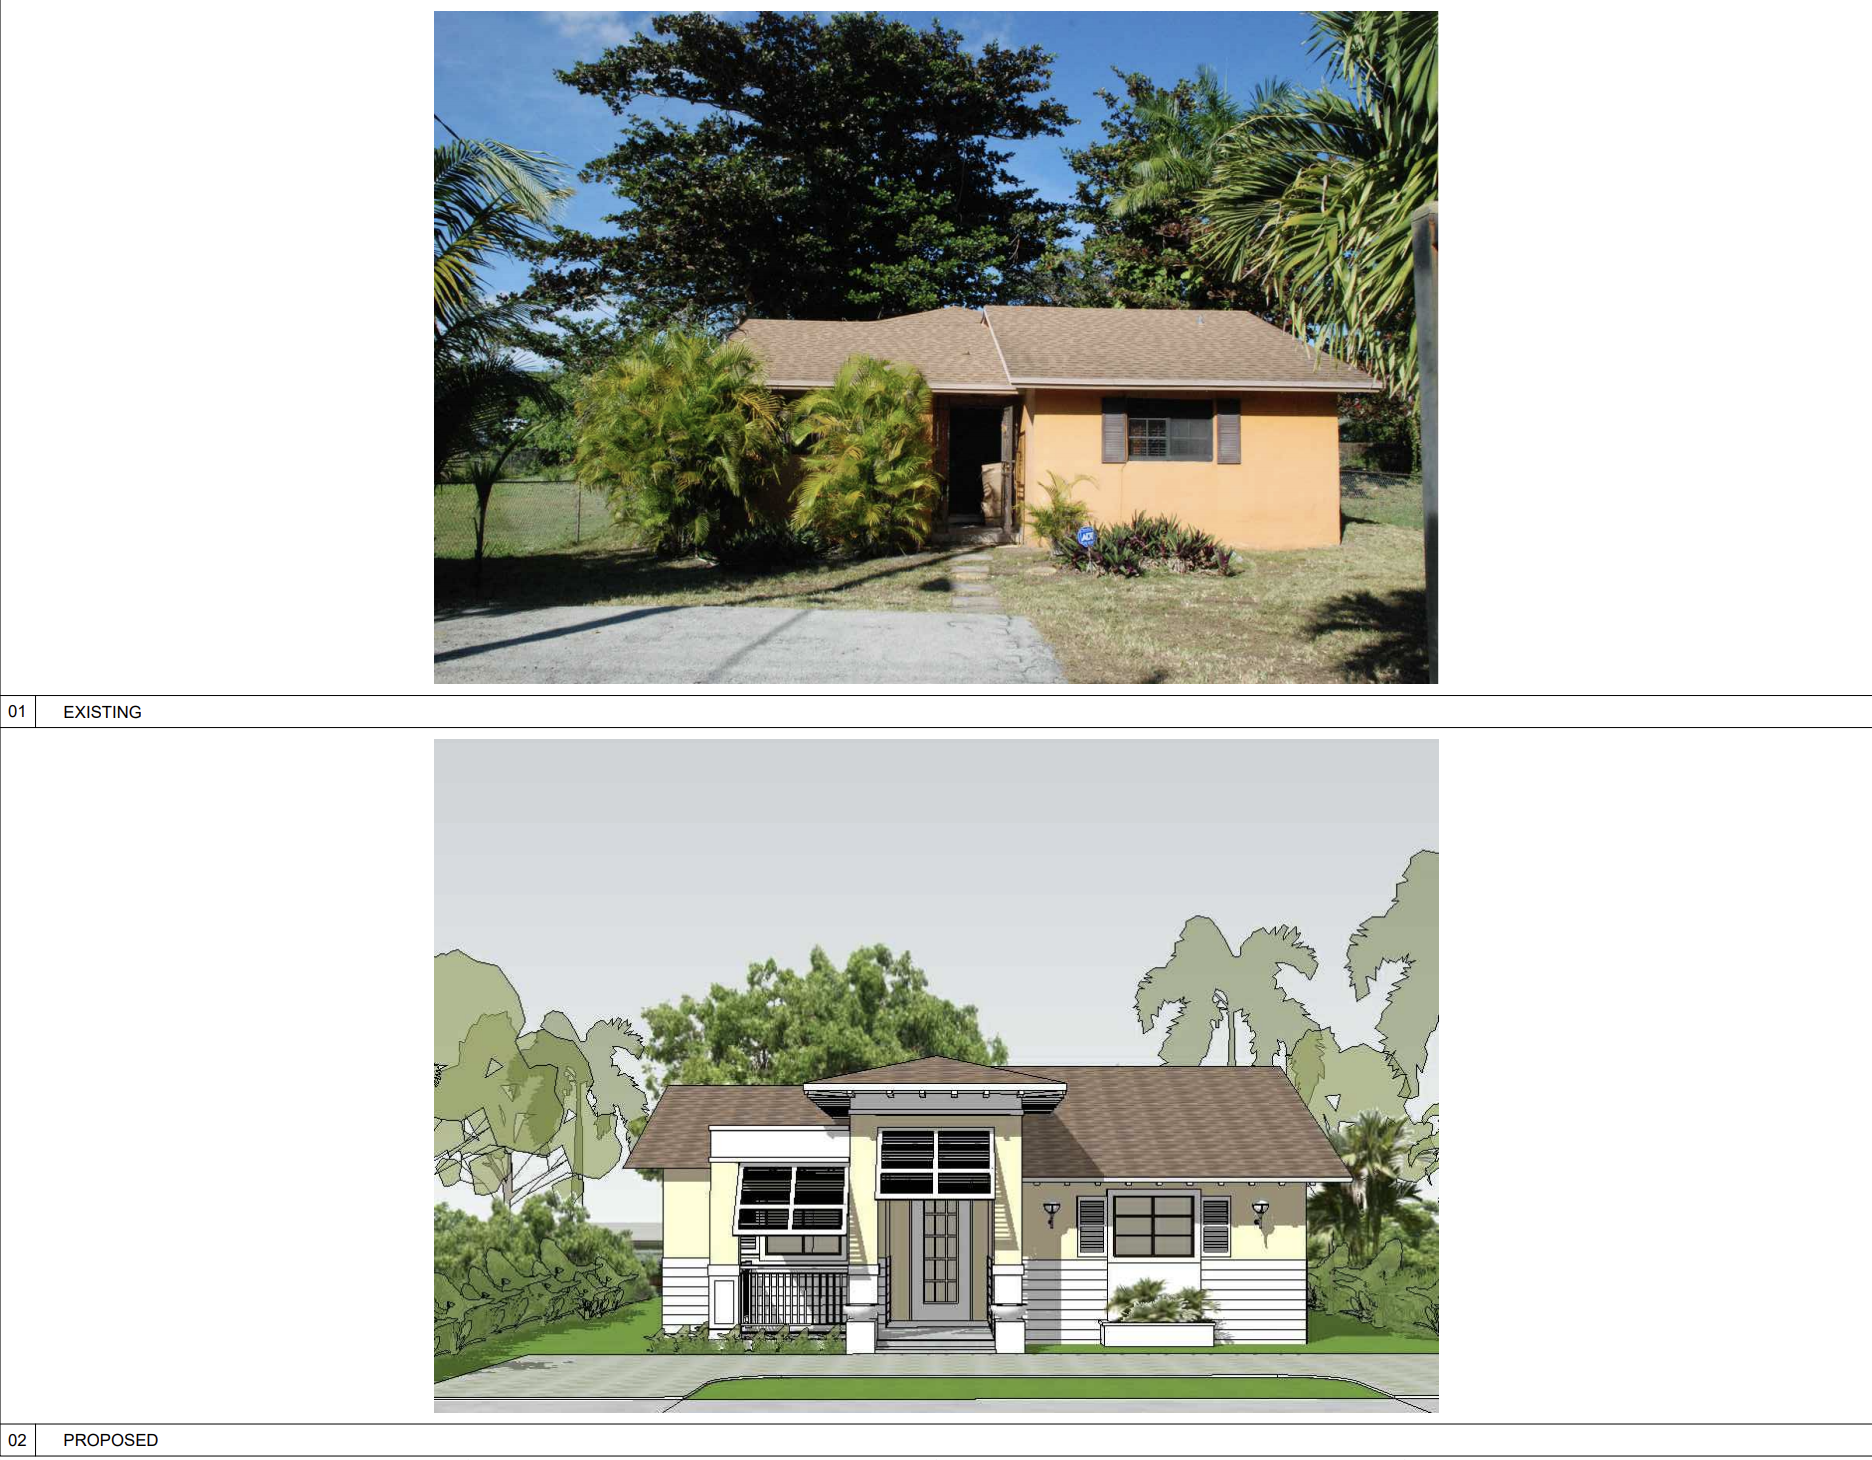 Current Vs. Proposed Home. Courtesy of Borges Architects + Associates.